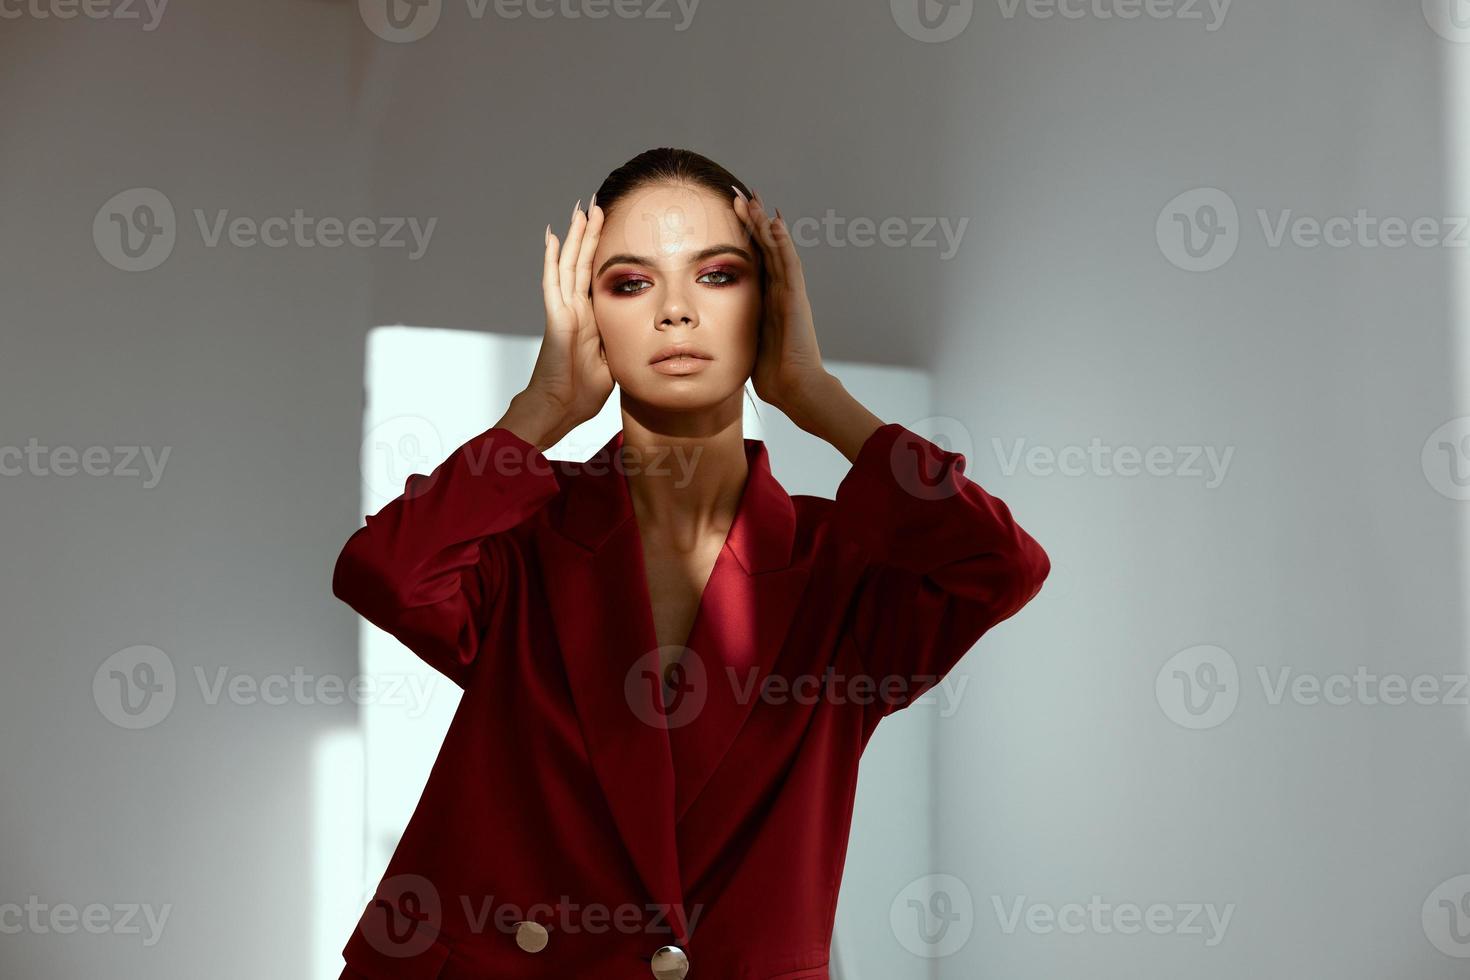 extravagant lady with bright makeup on her face touches her head with her hands photo